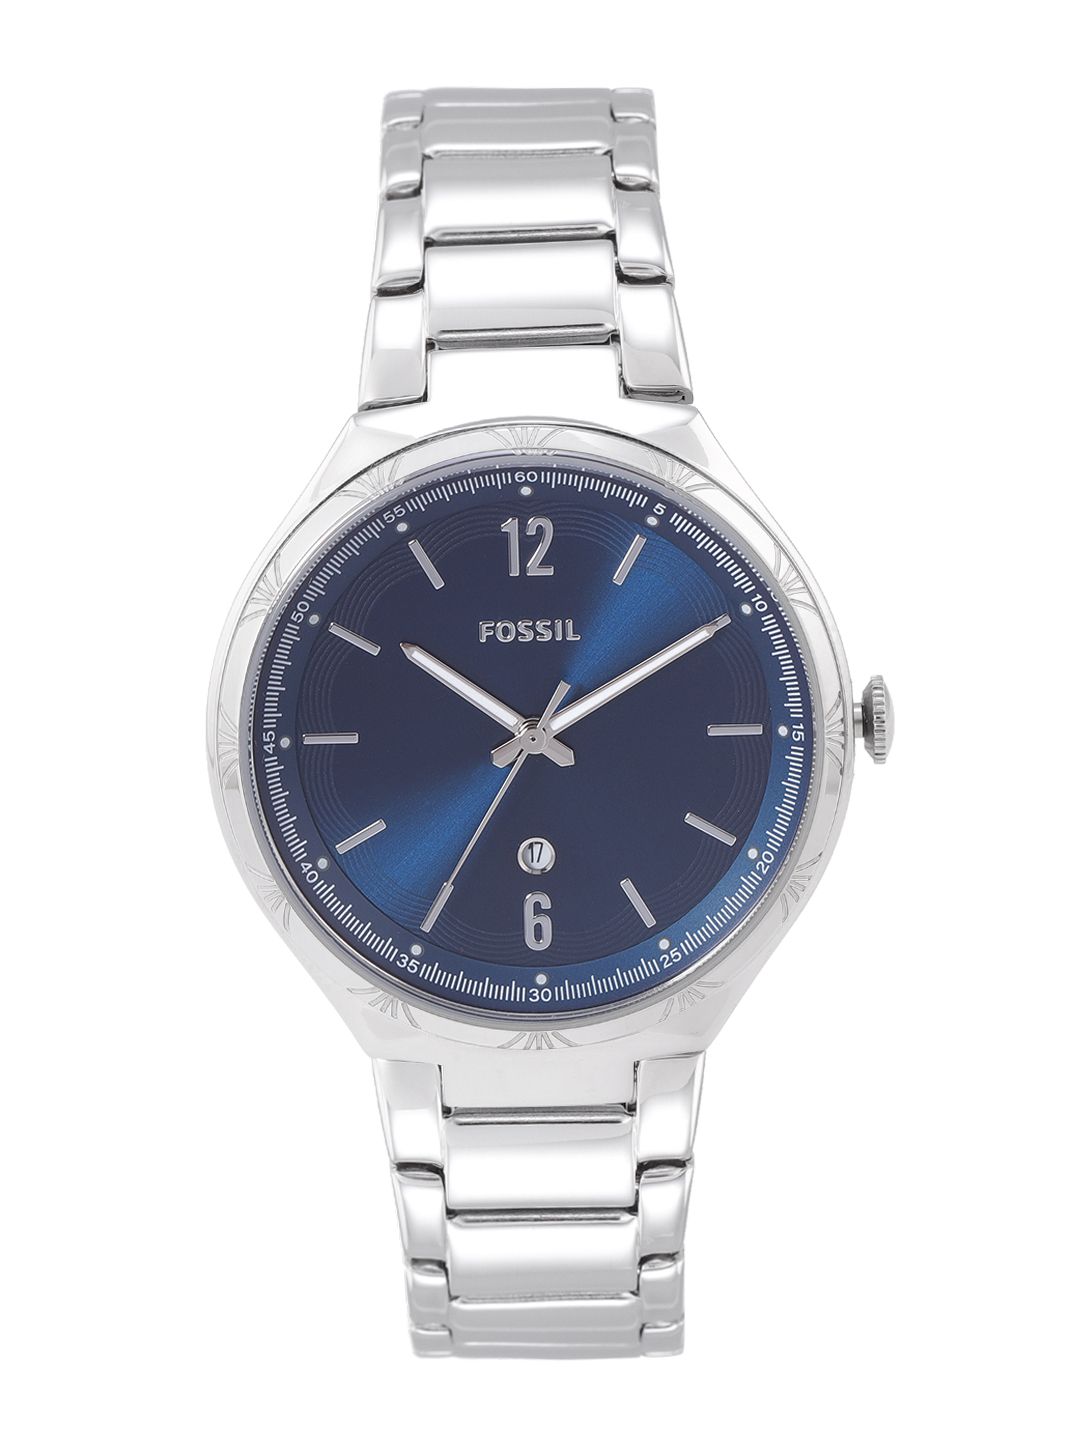 Fossil Women Blue Dial & Silver Toned Bracelet Style Straps Ashtyn Analogue Watch BQ3741 Price in India